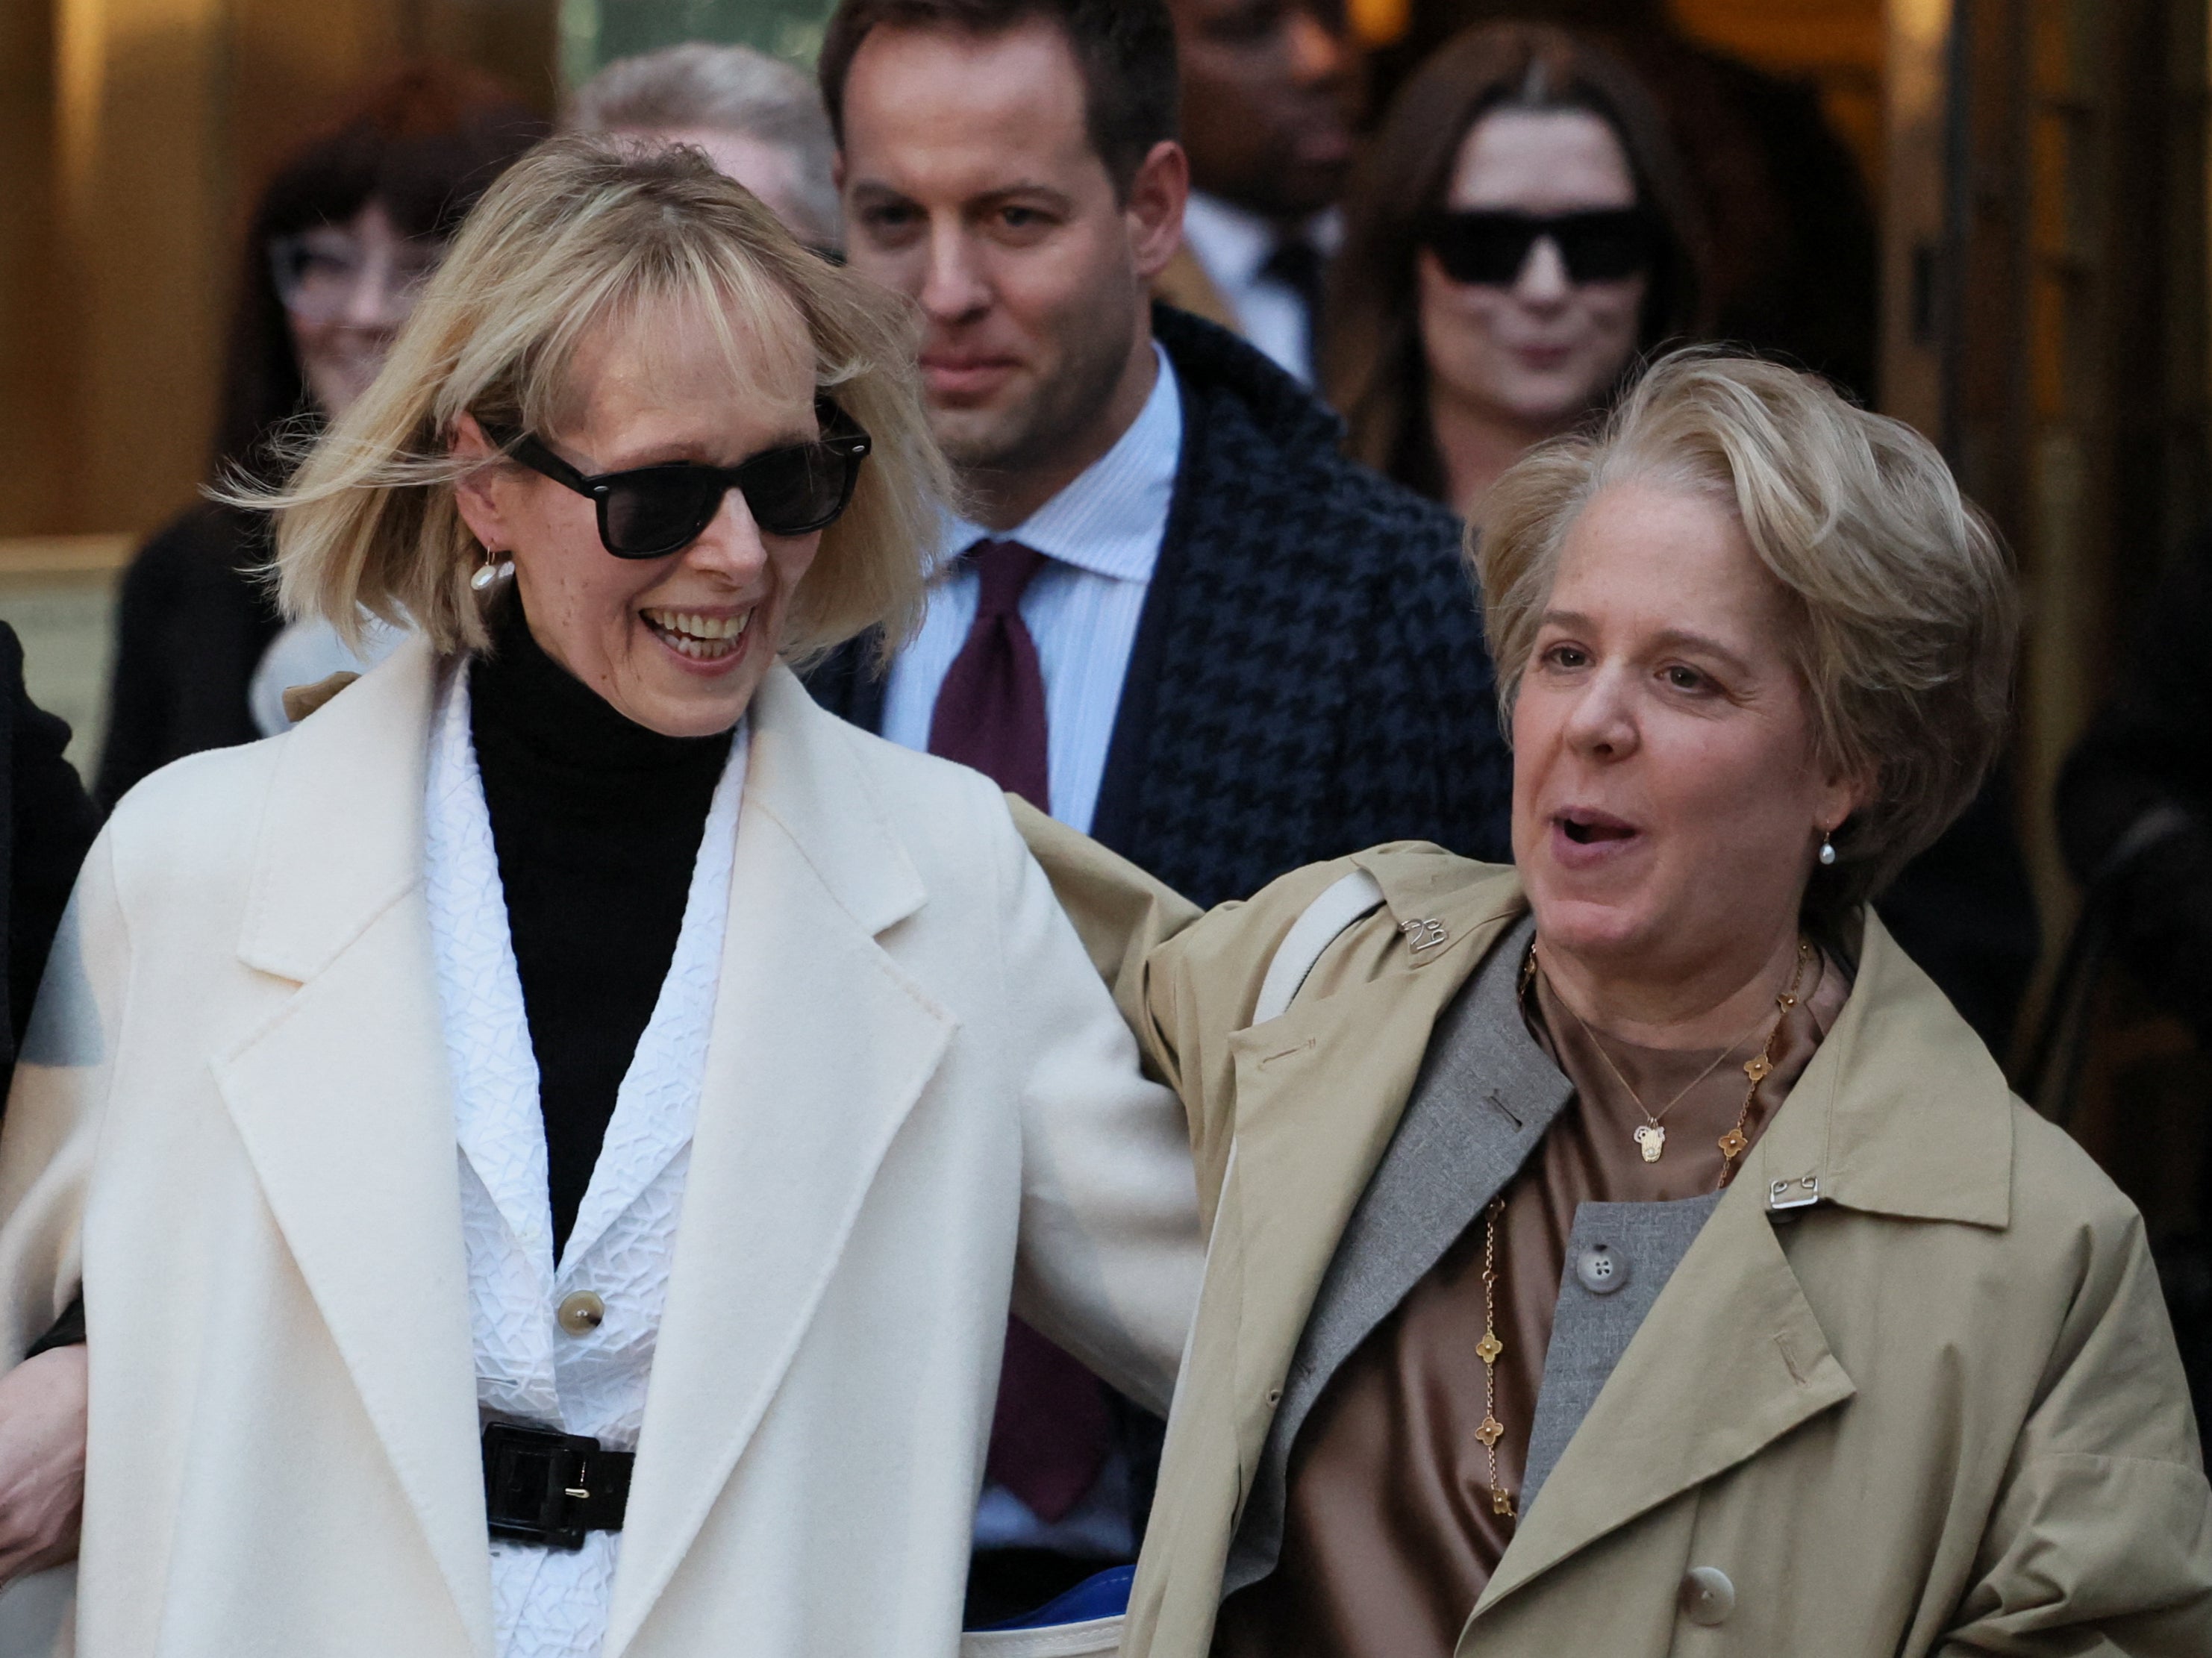 E Jean Carroll (left) with her attorney, Roberta Kaplan (right) as they leave court following a jury’s decision to award Carroll $83.3m in damages in her defamation case against Donald Trump